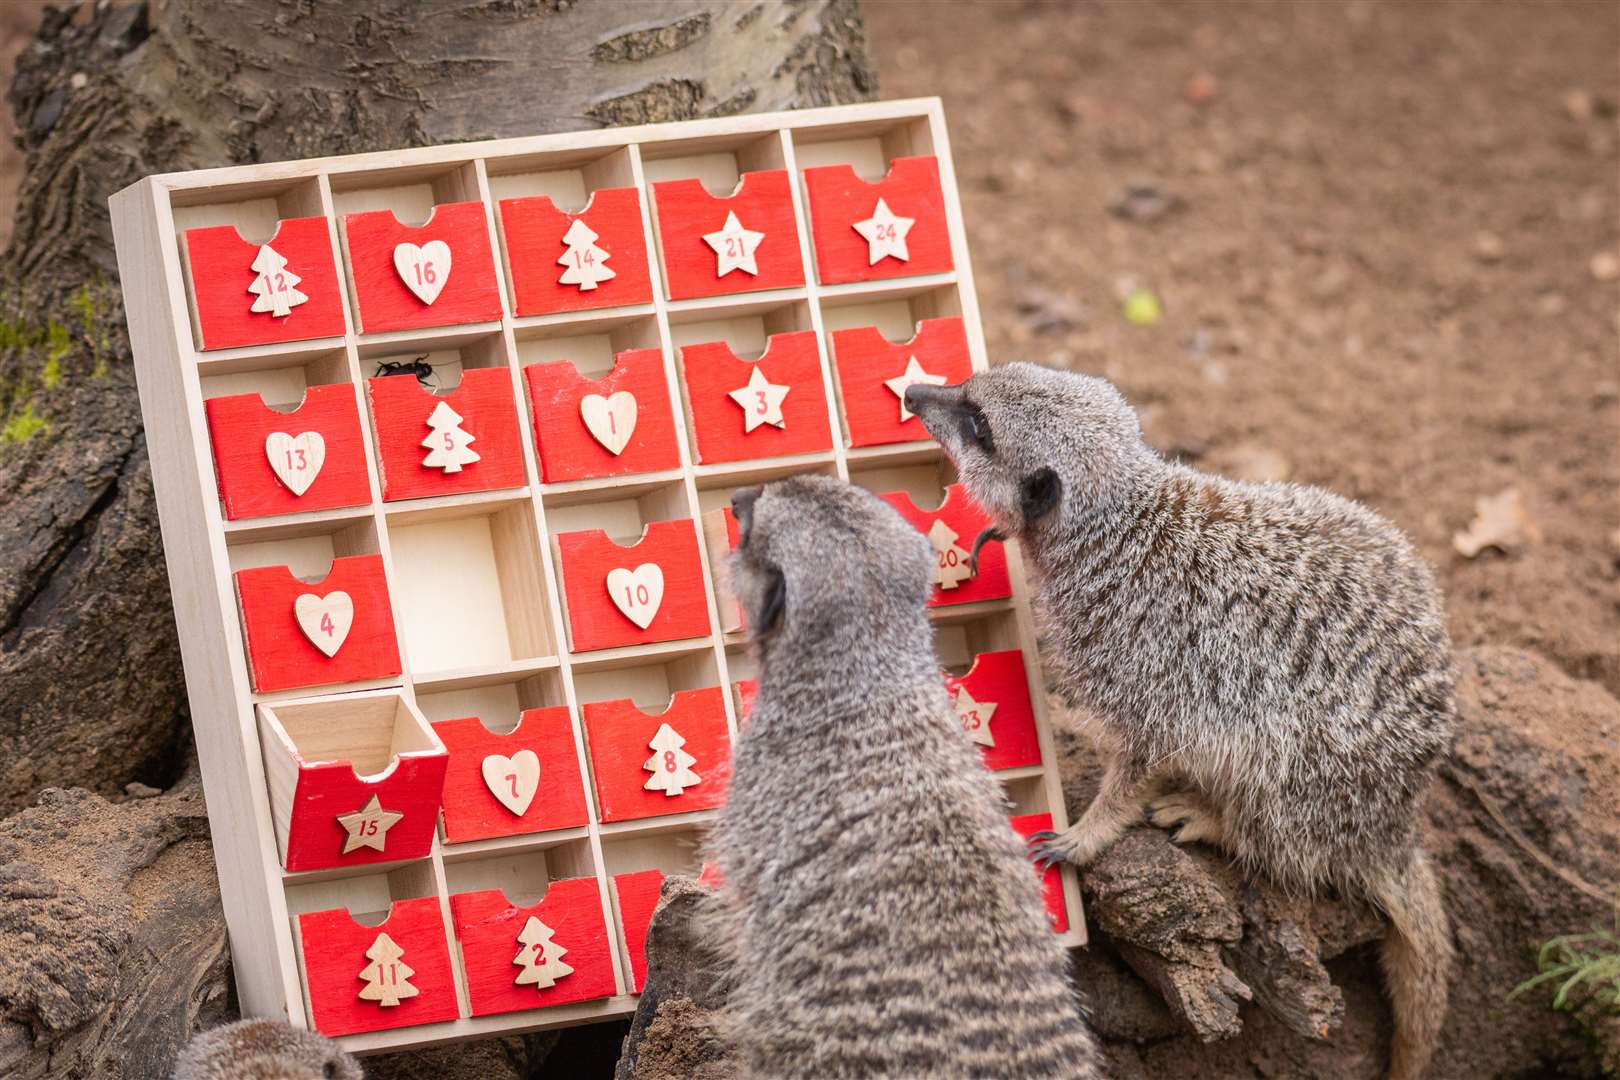 Zookeepers gifted a specially-made festive calendar to the furry family filled with their favourite snack, crickets. (ZSL London Zoo/PA)